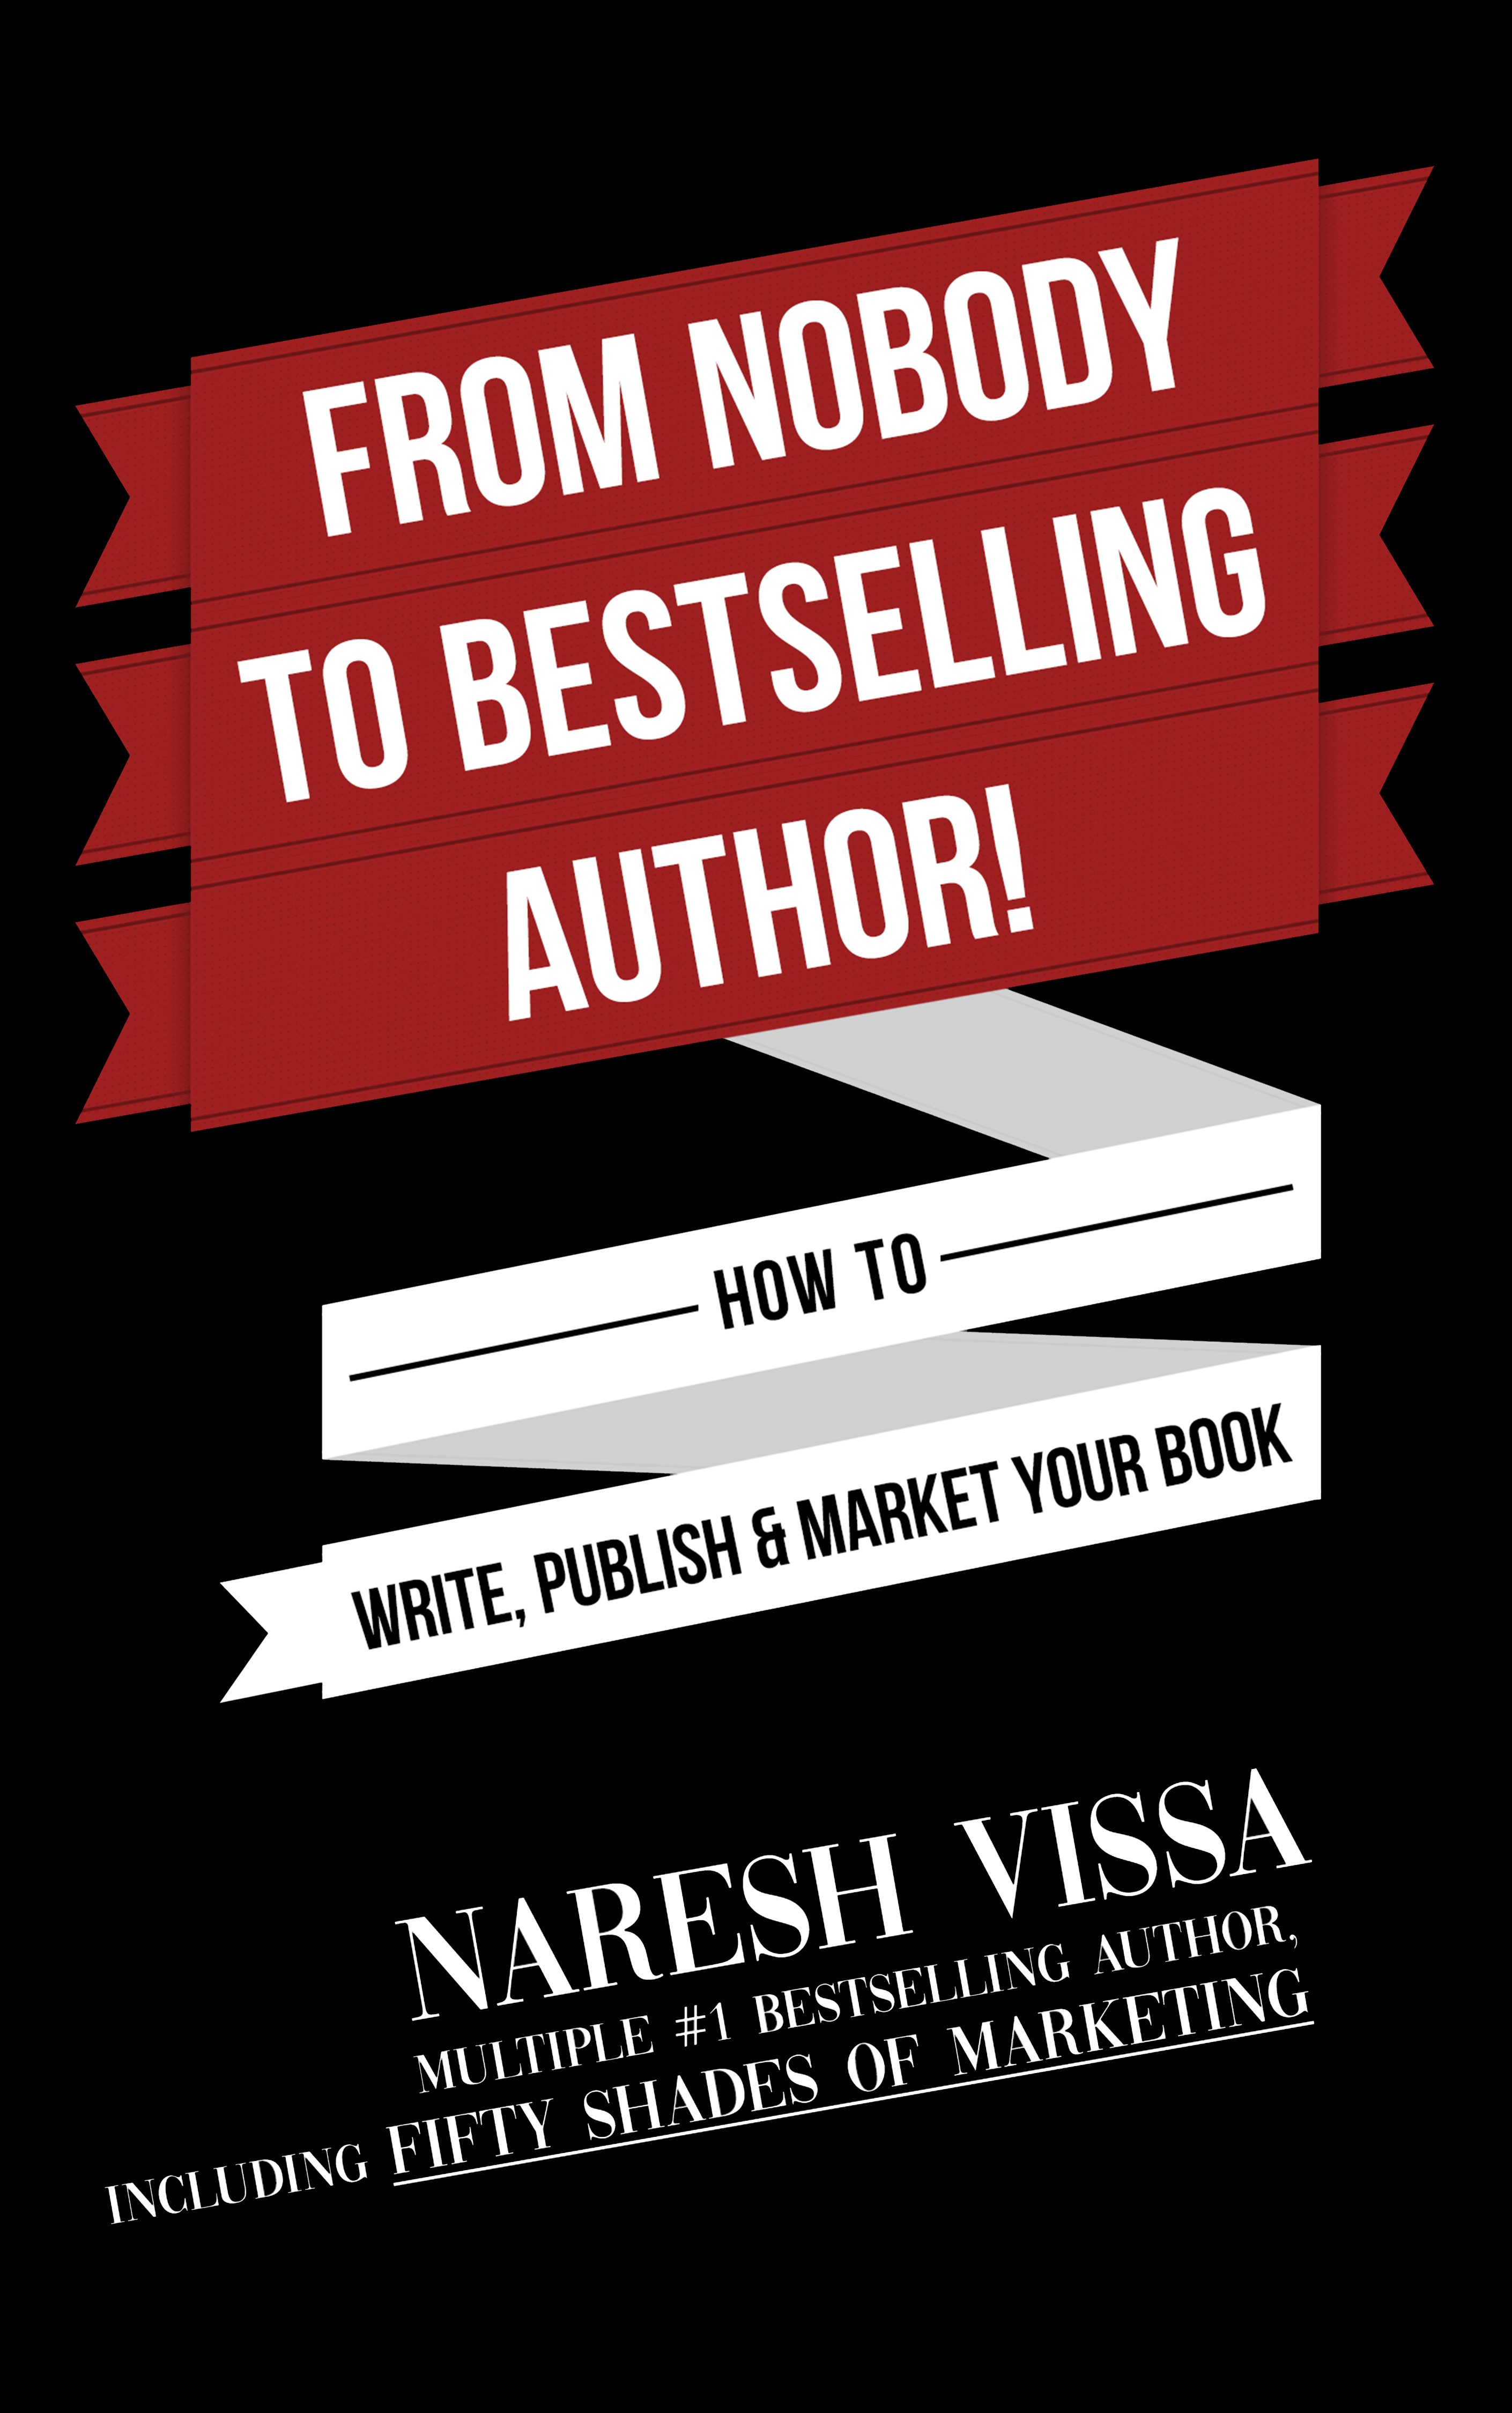 Fifty Shades of Marketing: Whip Your Business Into Shape & Dominate Your Competition, by Naresh Vissa